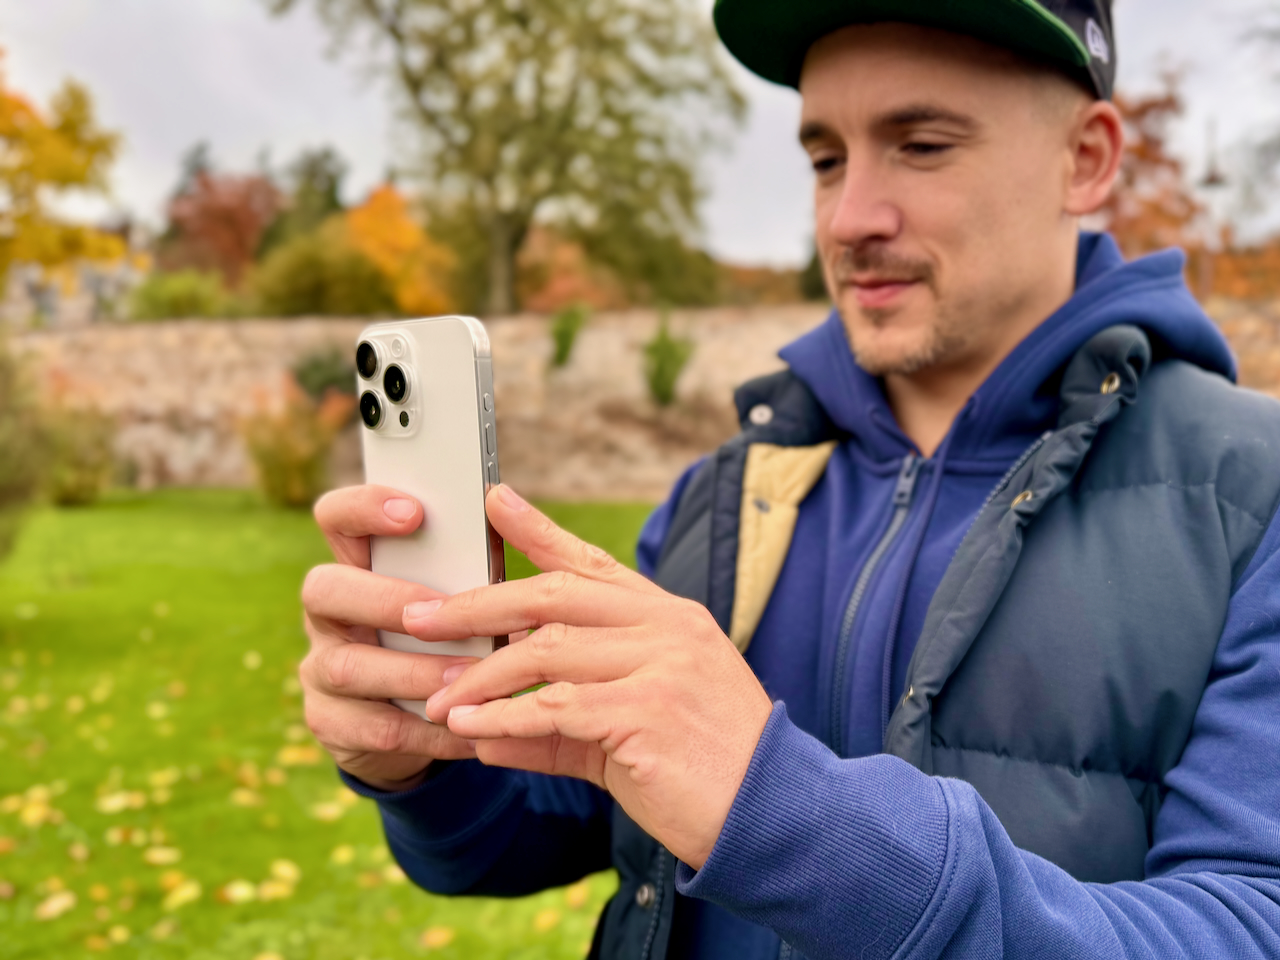 iPhone photography – videos in Pro Res resolution. Photo: Sascha Tegtmeyer